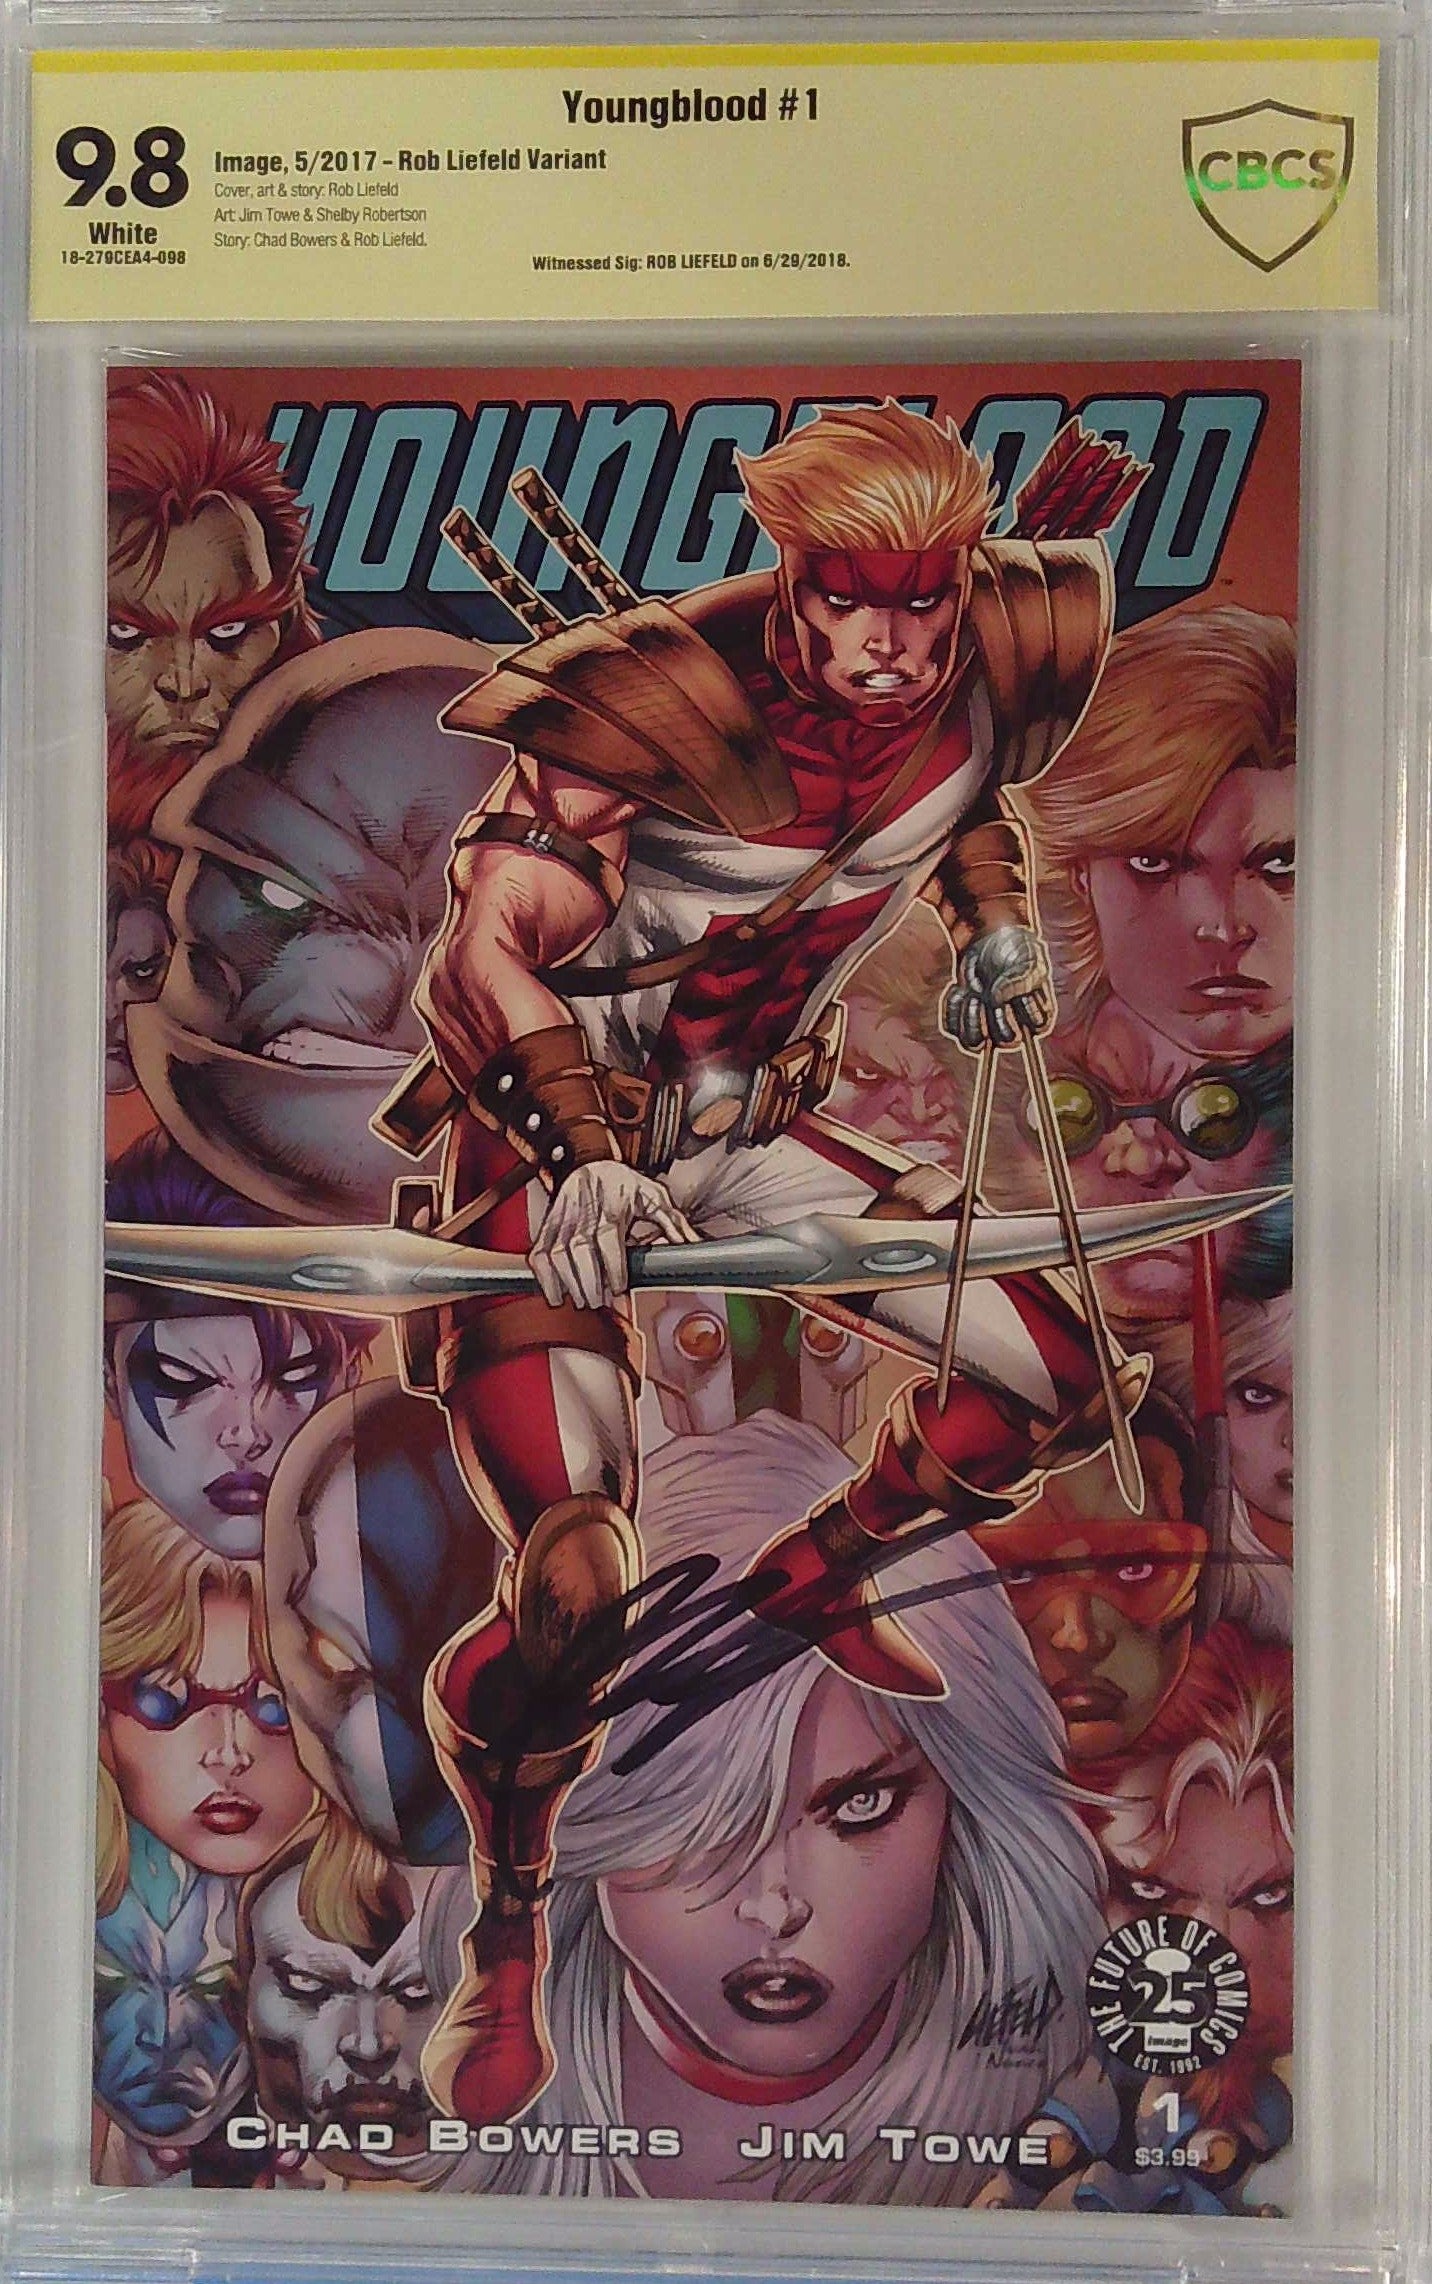 Youngblood #1 Rob Liefeld Variant 9.8 CBCS Yellow Label